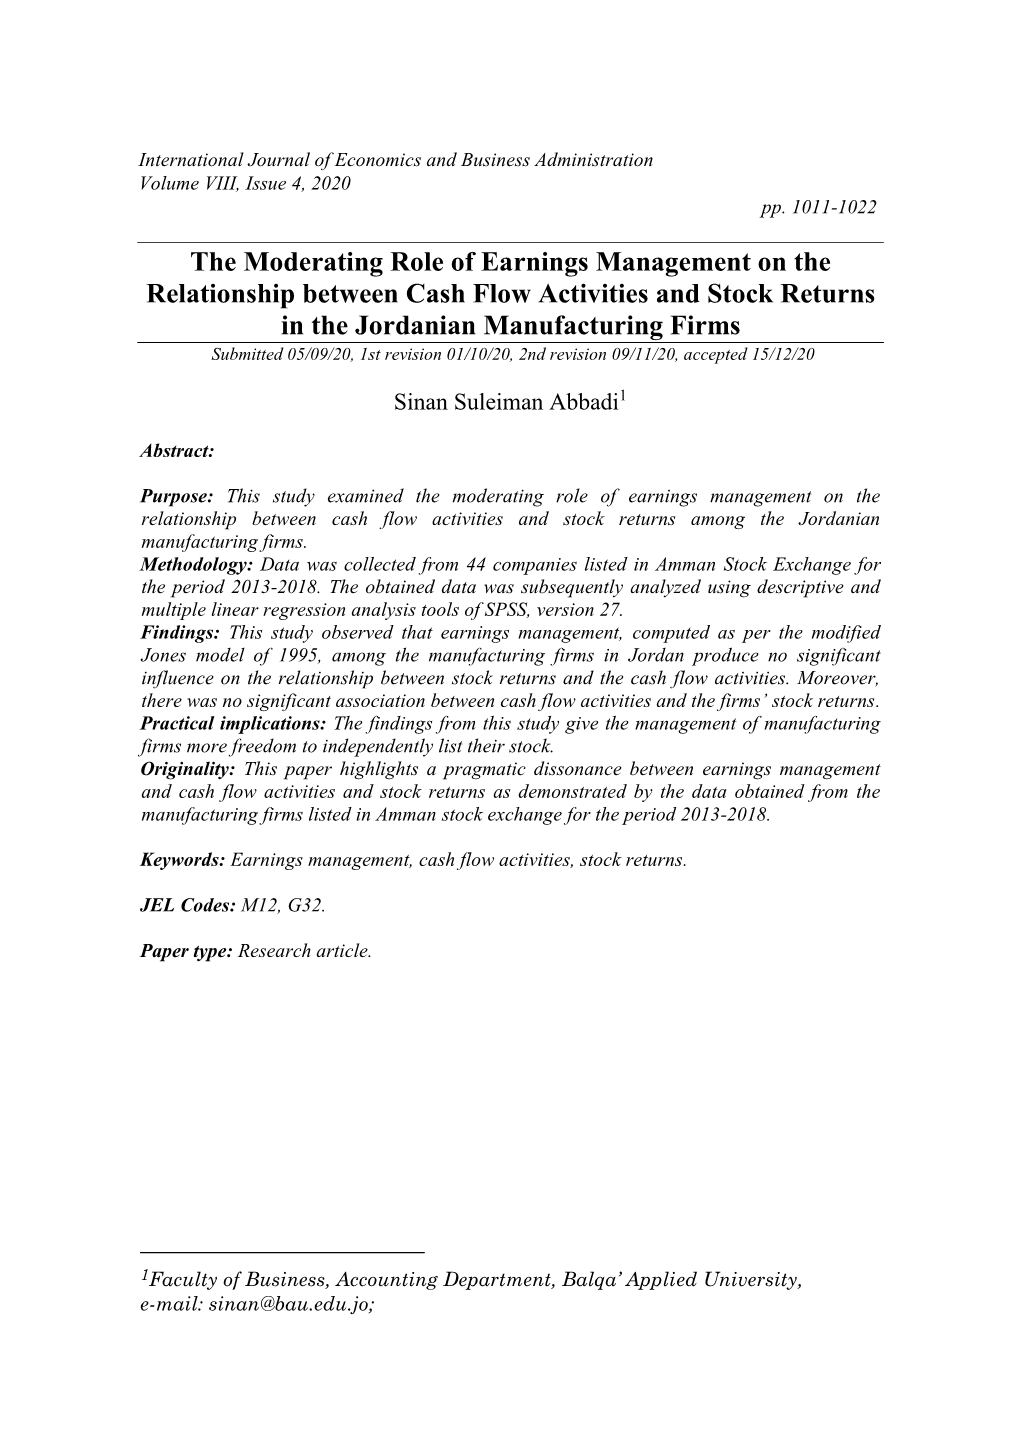 The Moderating Role of Earnings Management on the Relationship